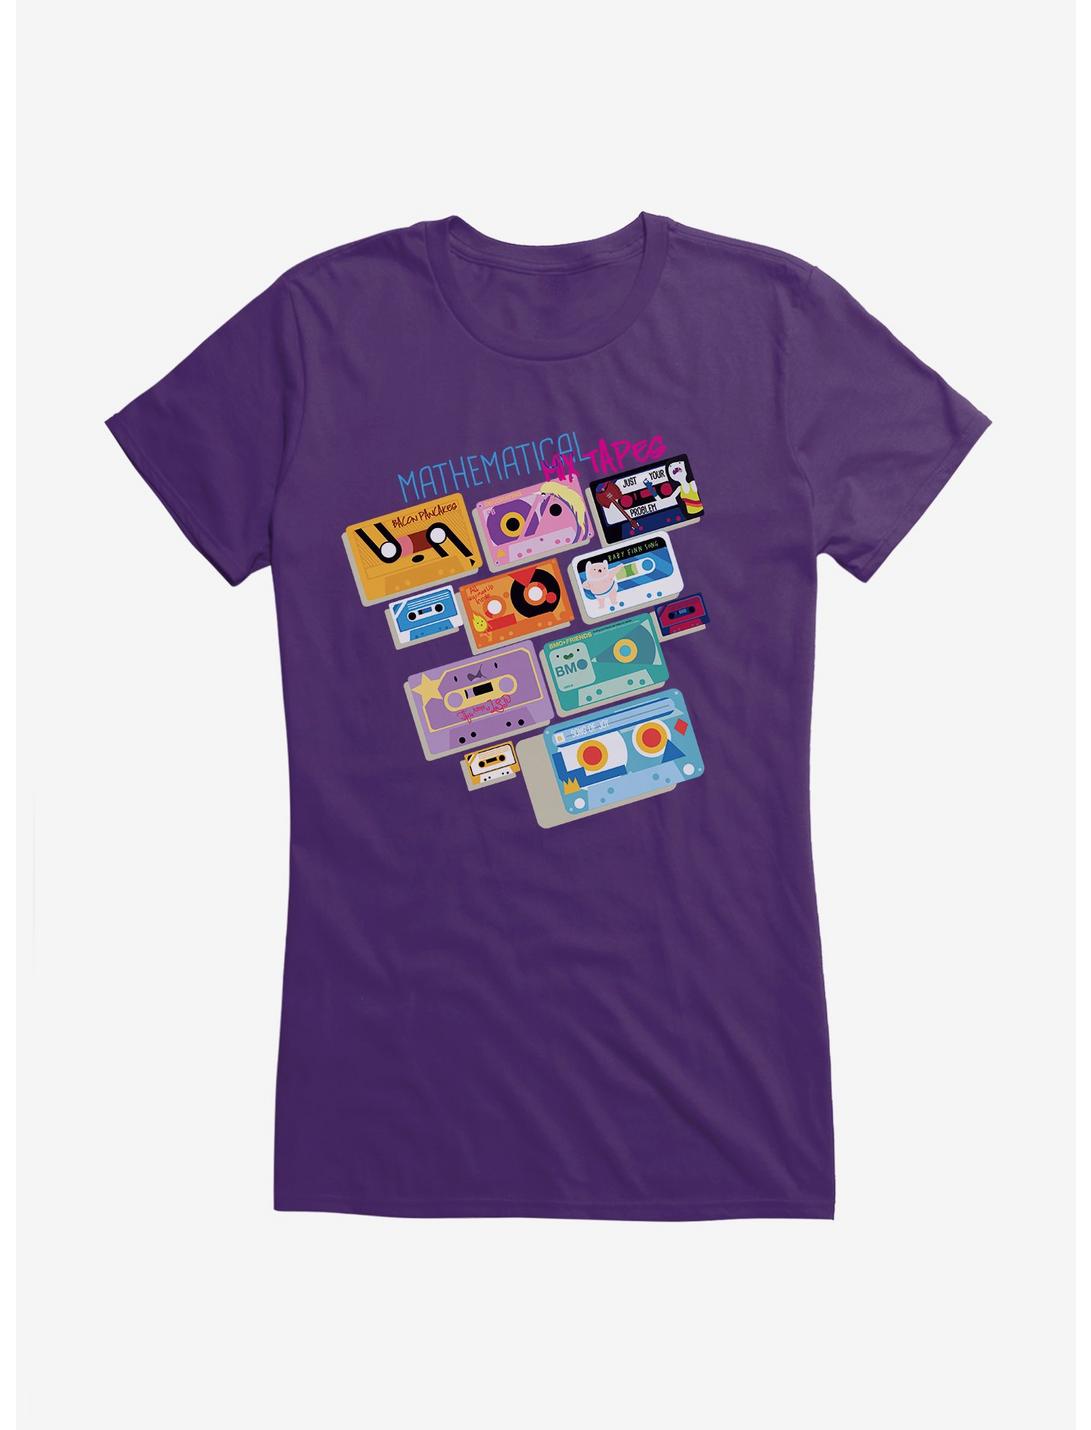 Adventure Time Mix Tapes Girls T-Shirt, , hi-res